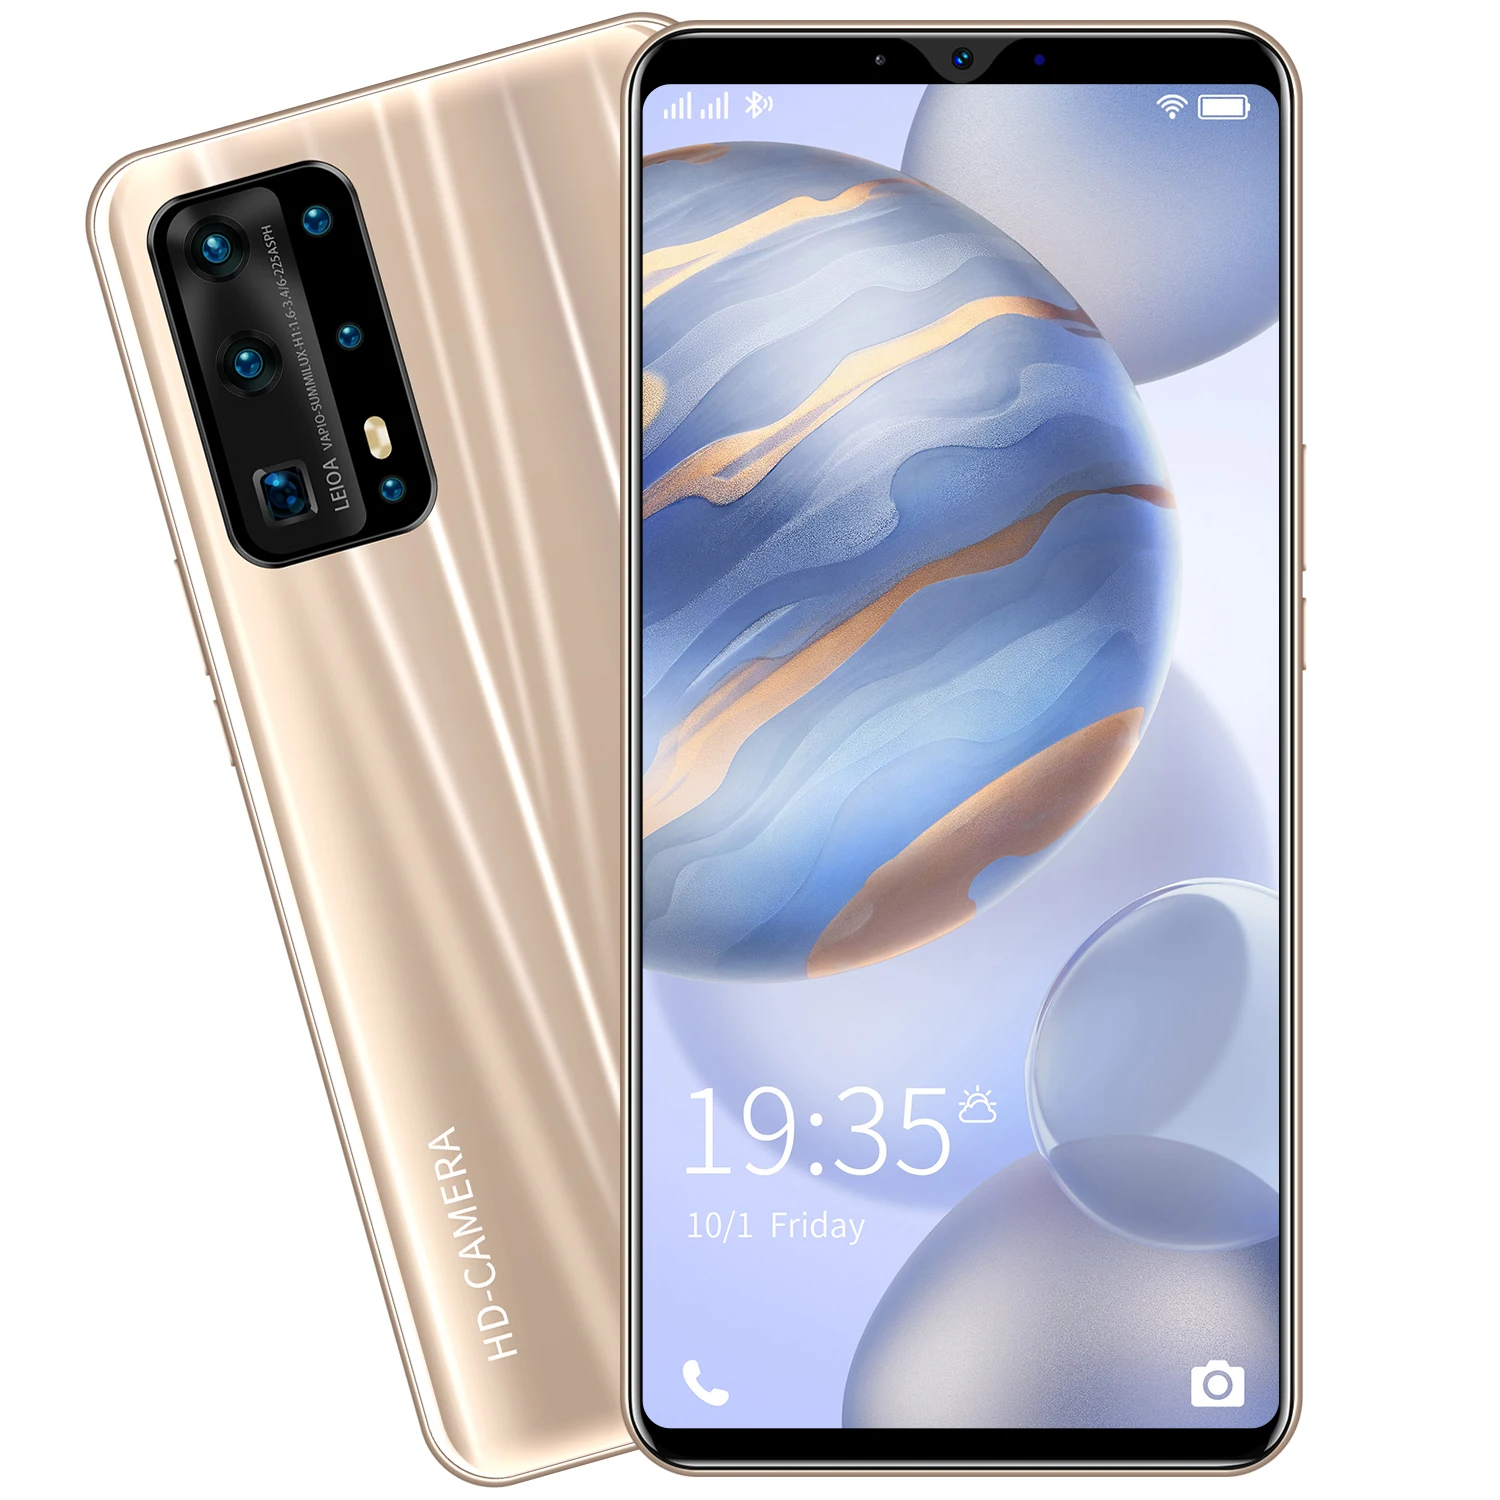 Goedkope Grote Scherm Android Telefoon P43 Max Originele Smartphone 2g 3g 4g Android Mobiele Telefoon - Buy Mobiele Telefoon,Goedkope Telefoon,Smartphone Product on Alibaba.com